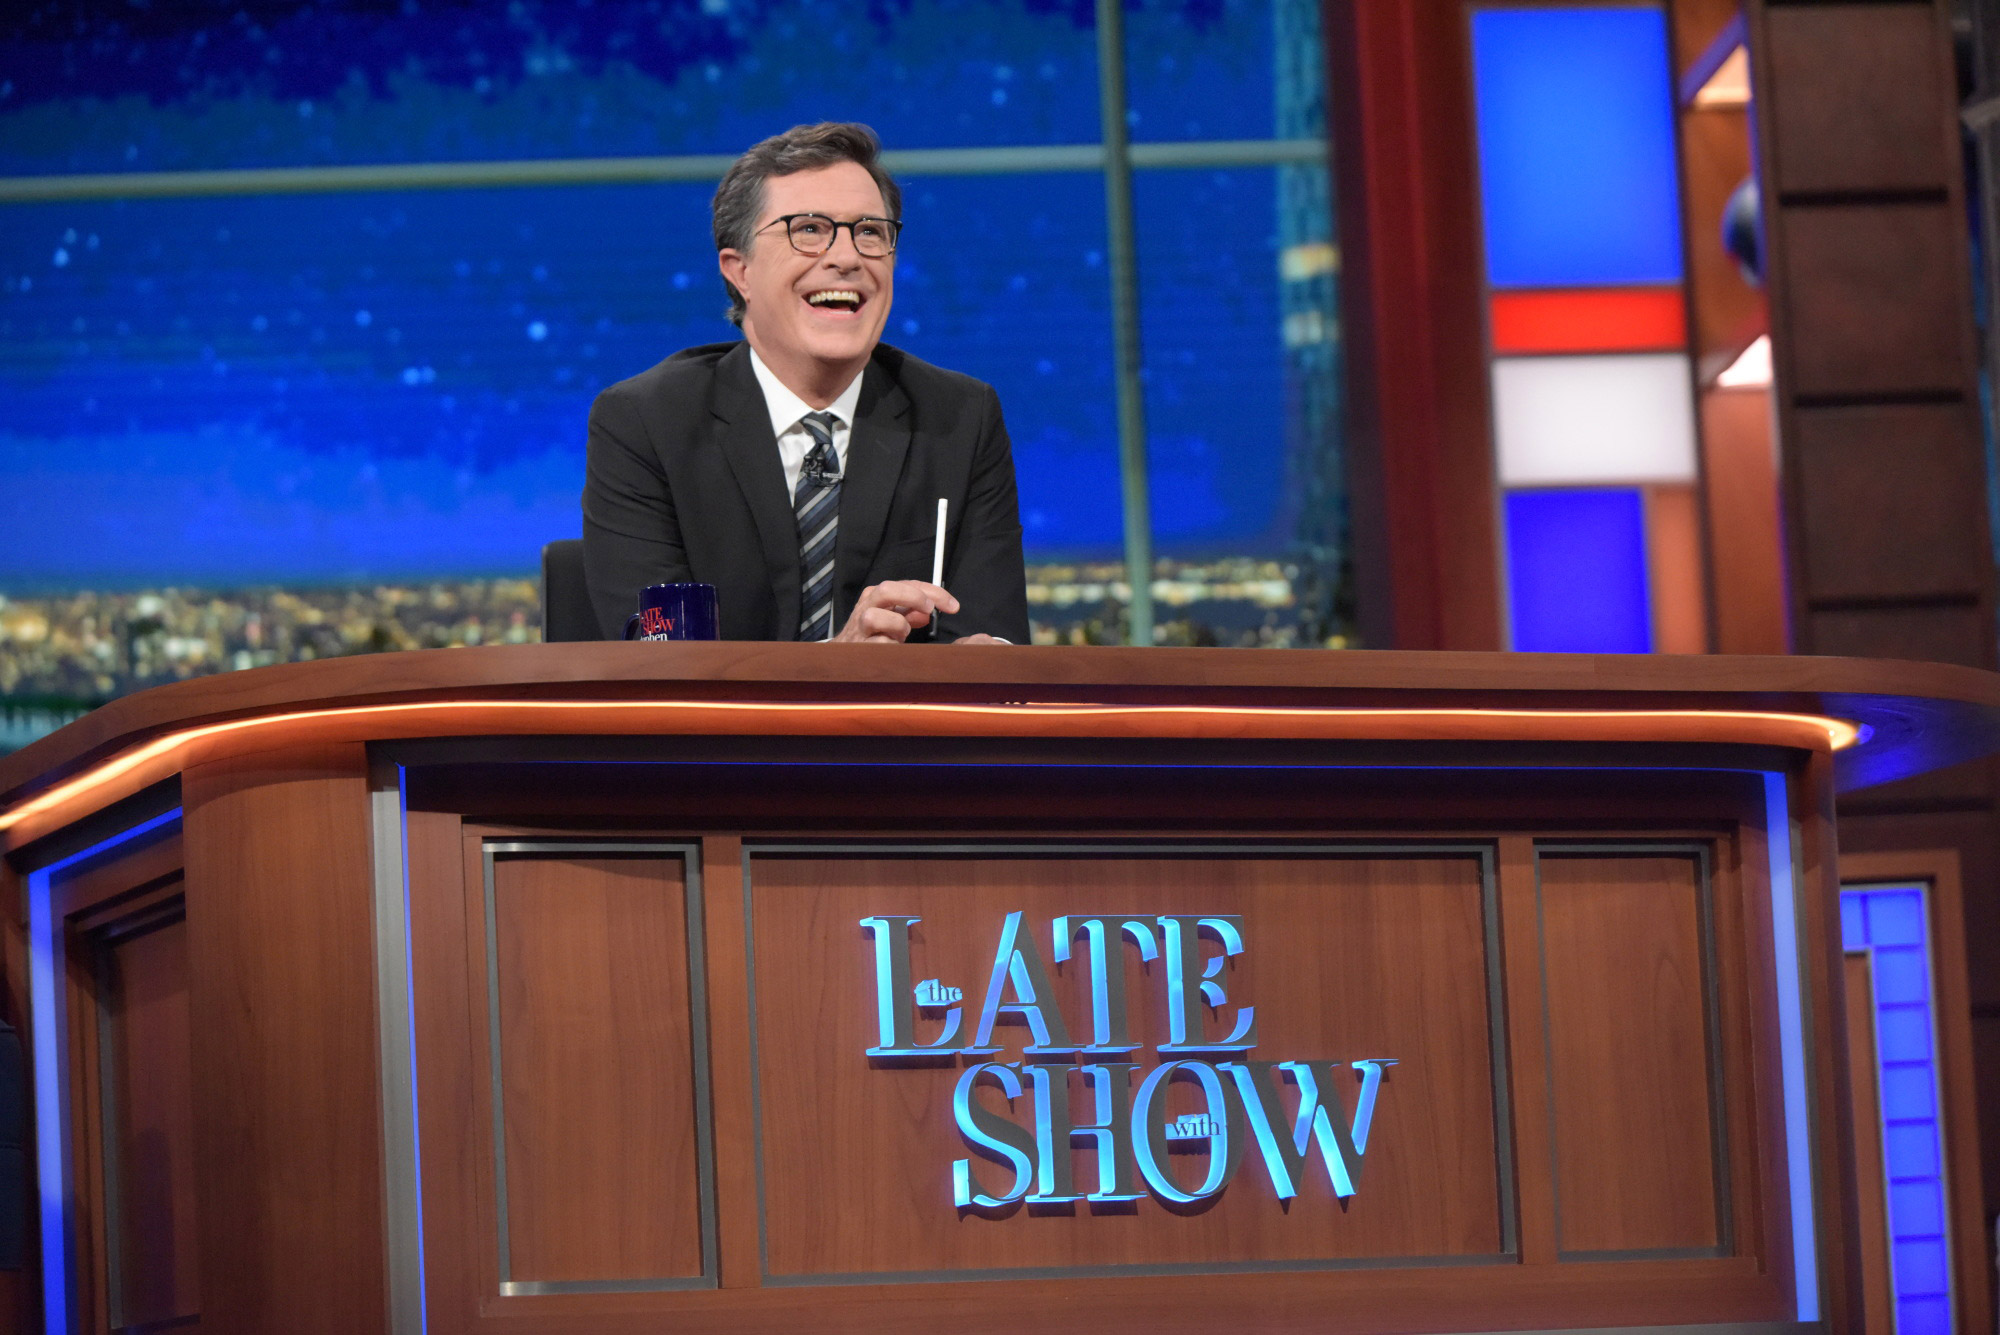 "The Late Show" with Stephen Colbert airing live in New York on July 25, 2016.